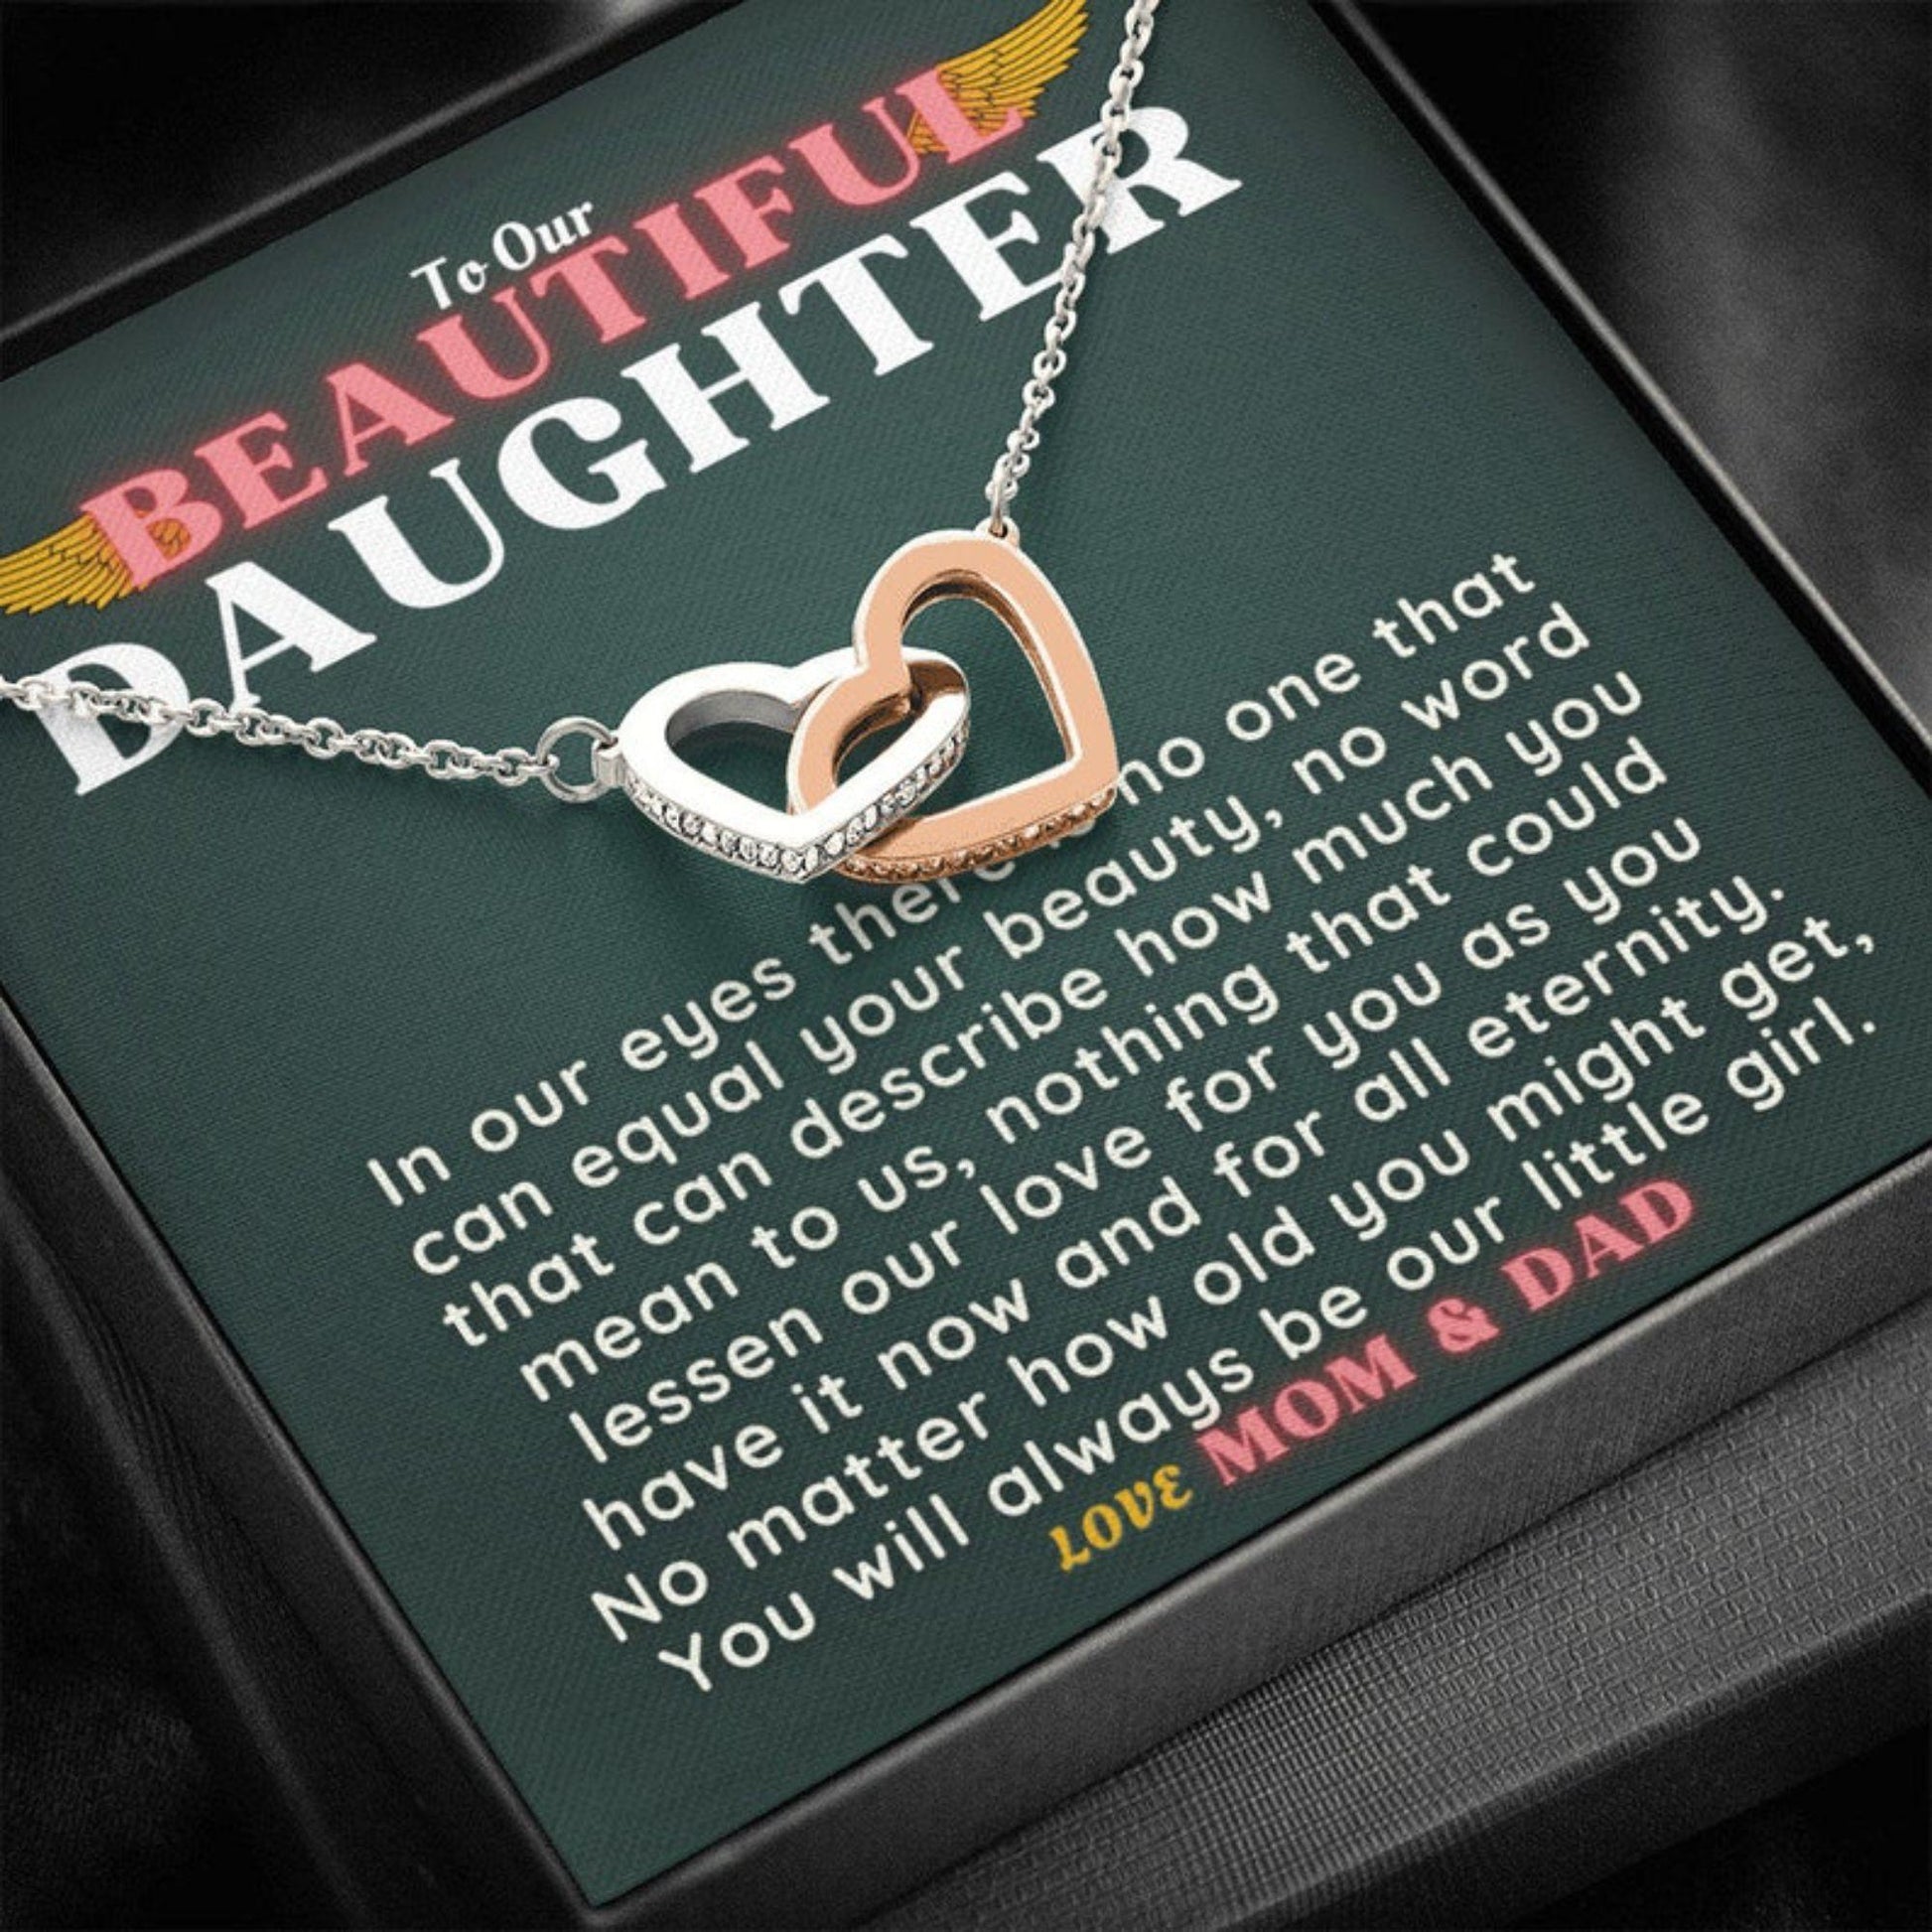 Daughter Necklace, Daughter Valentines Day Necklace Gift Box From Mom Dad|To Our Beautiful Daughter Necklace